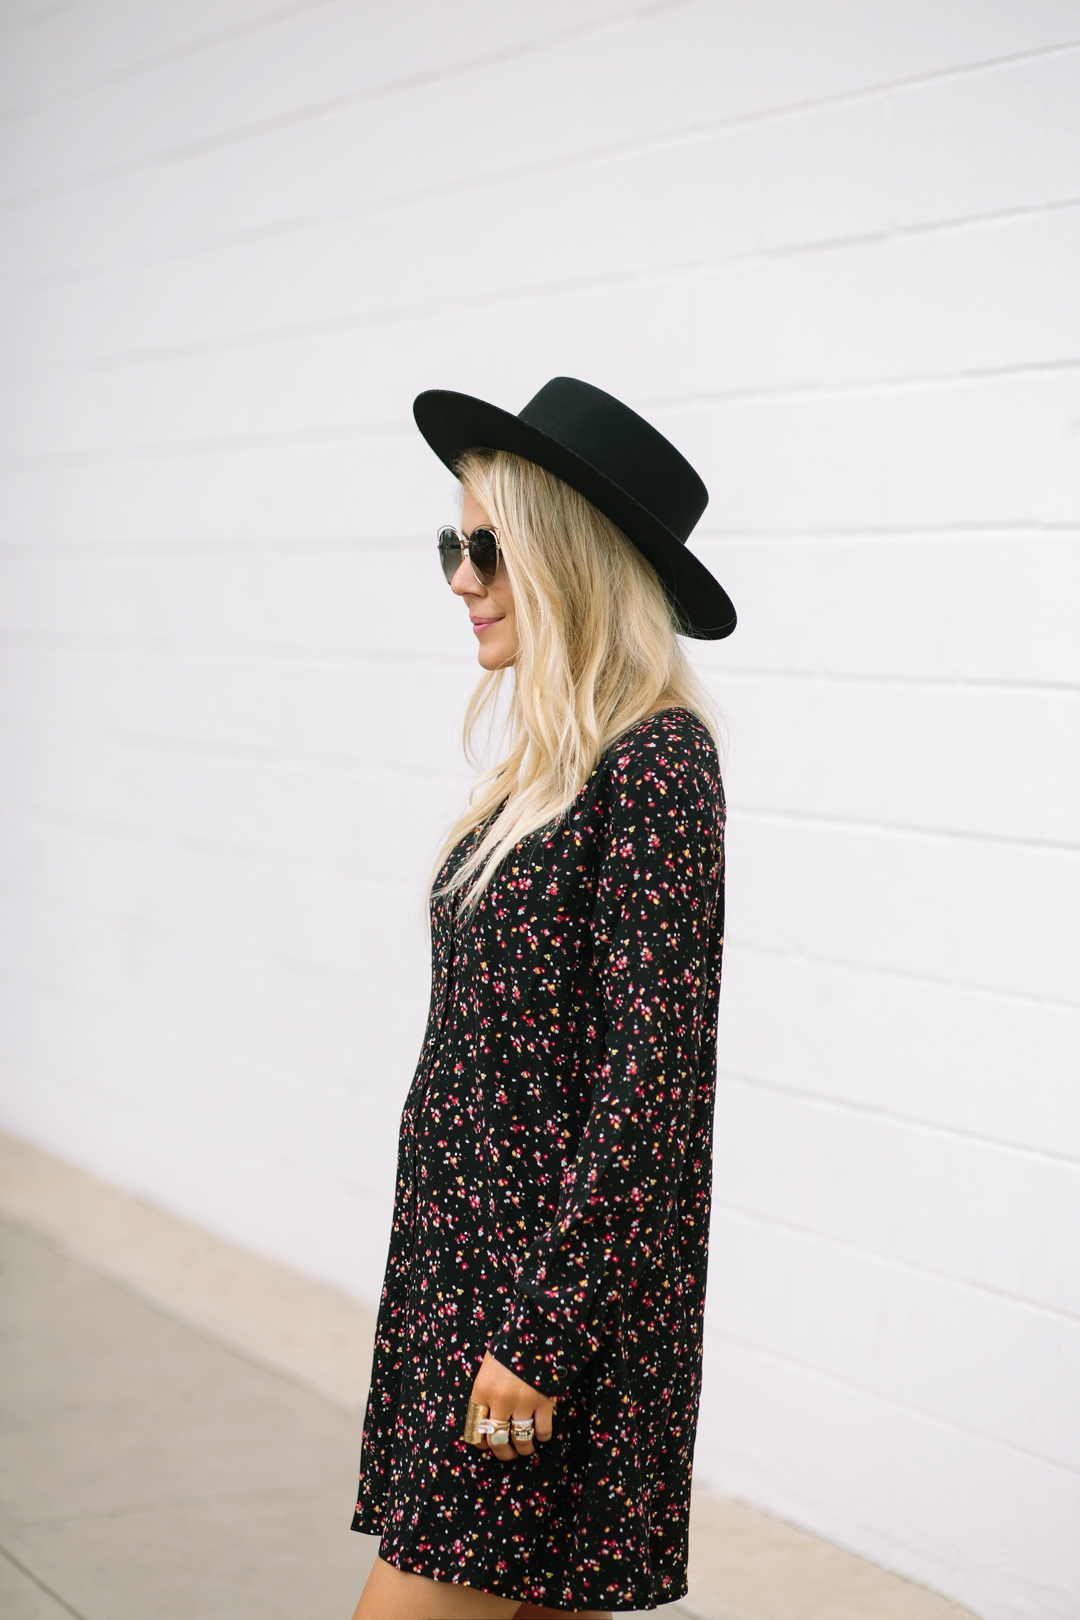 Lisa Allen of LunchPails and Lipstick wearing a black boater hat with a floral mini dress from Madewell and Chanel loafers